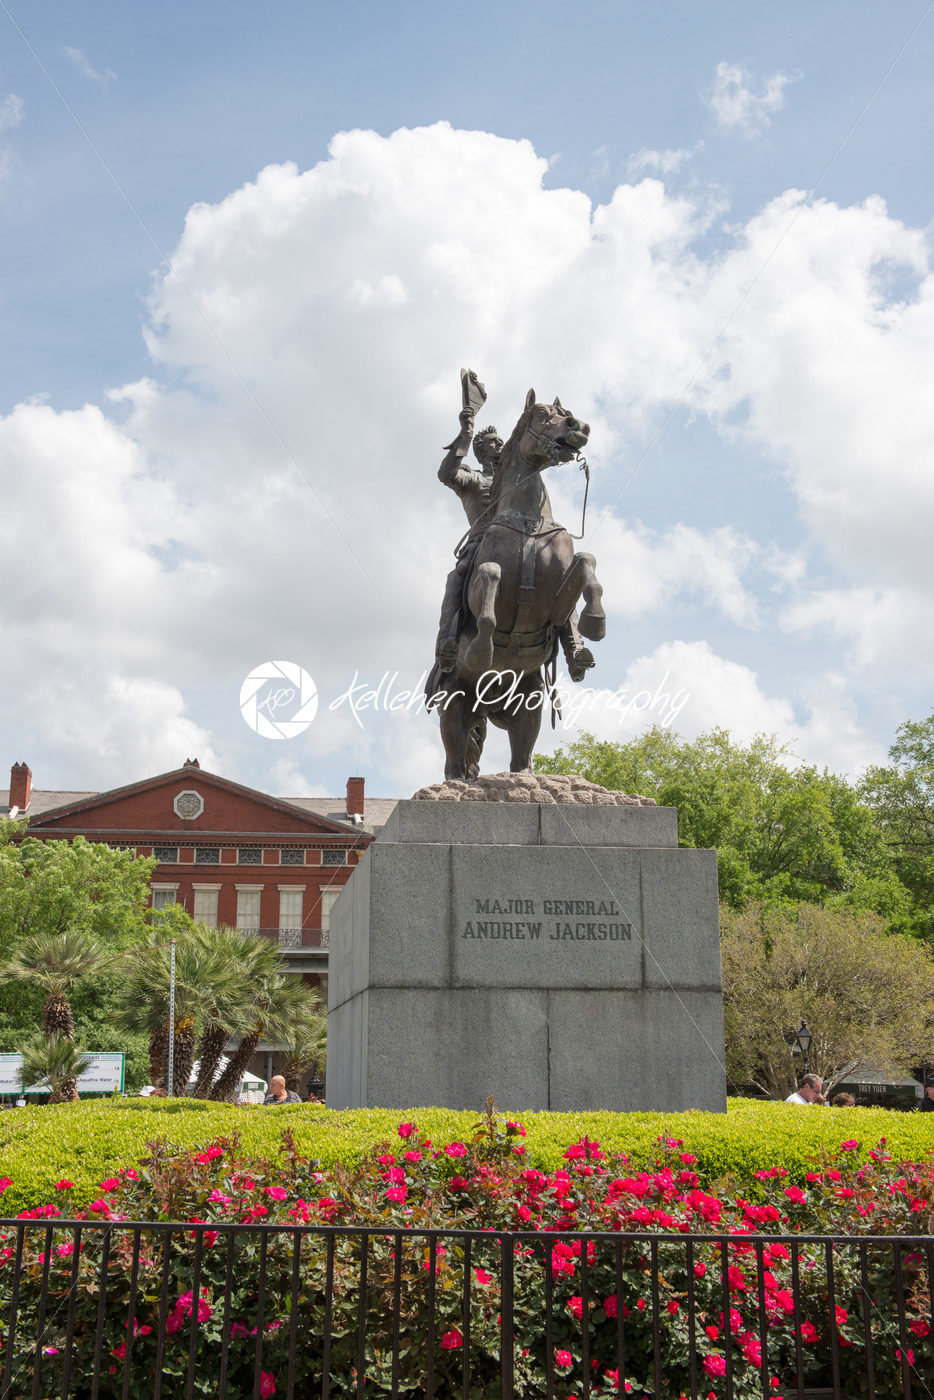 NEW ORLEANS, LA – APRIL 13: Statue of Andrew Jackson at the Jackson Square New Orleans on April 13, 2014 - Kelleher Photography Store